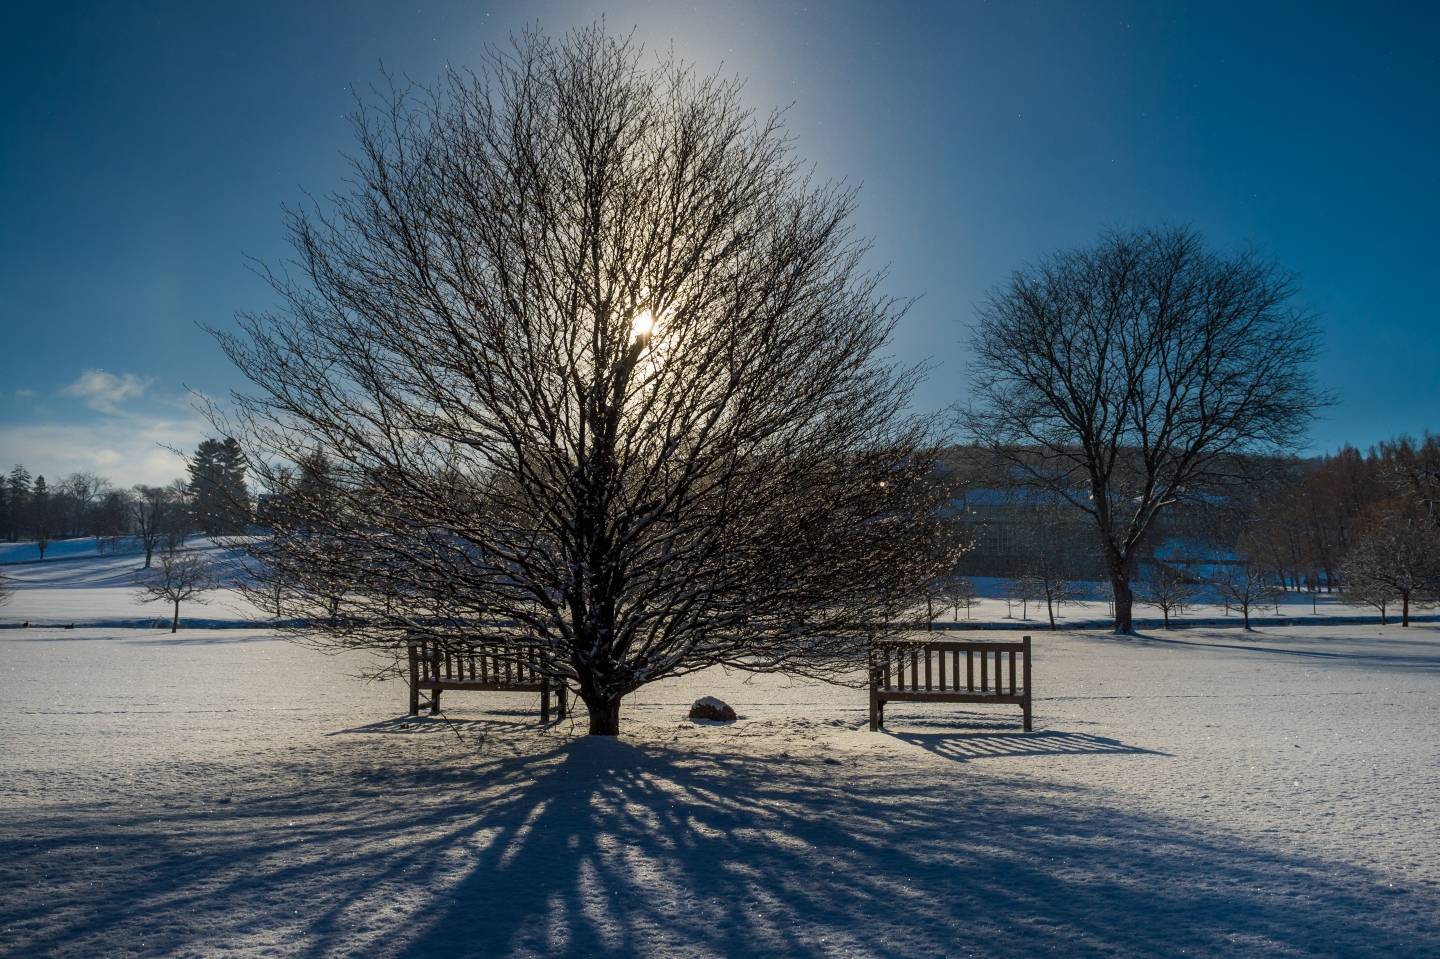 Benches and tree with sunlight and snow on the ground.